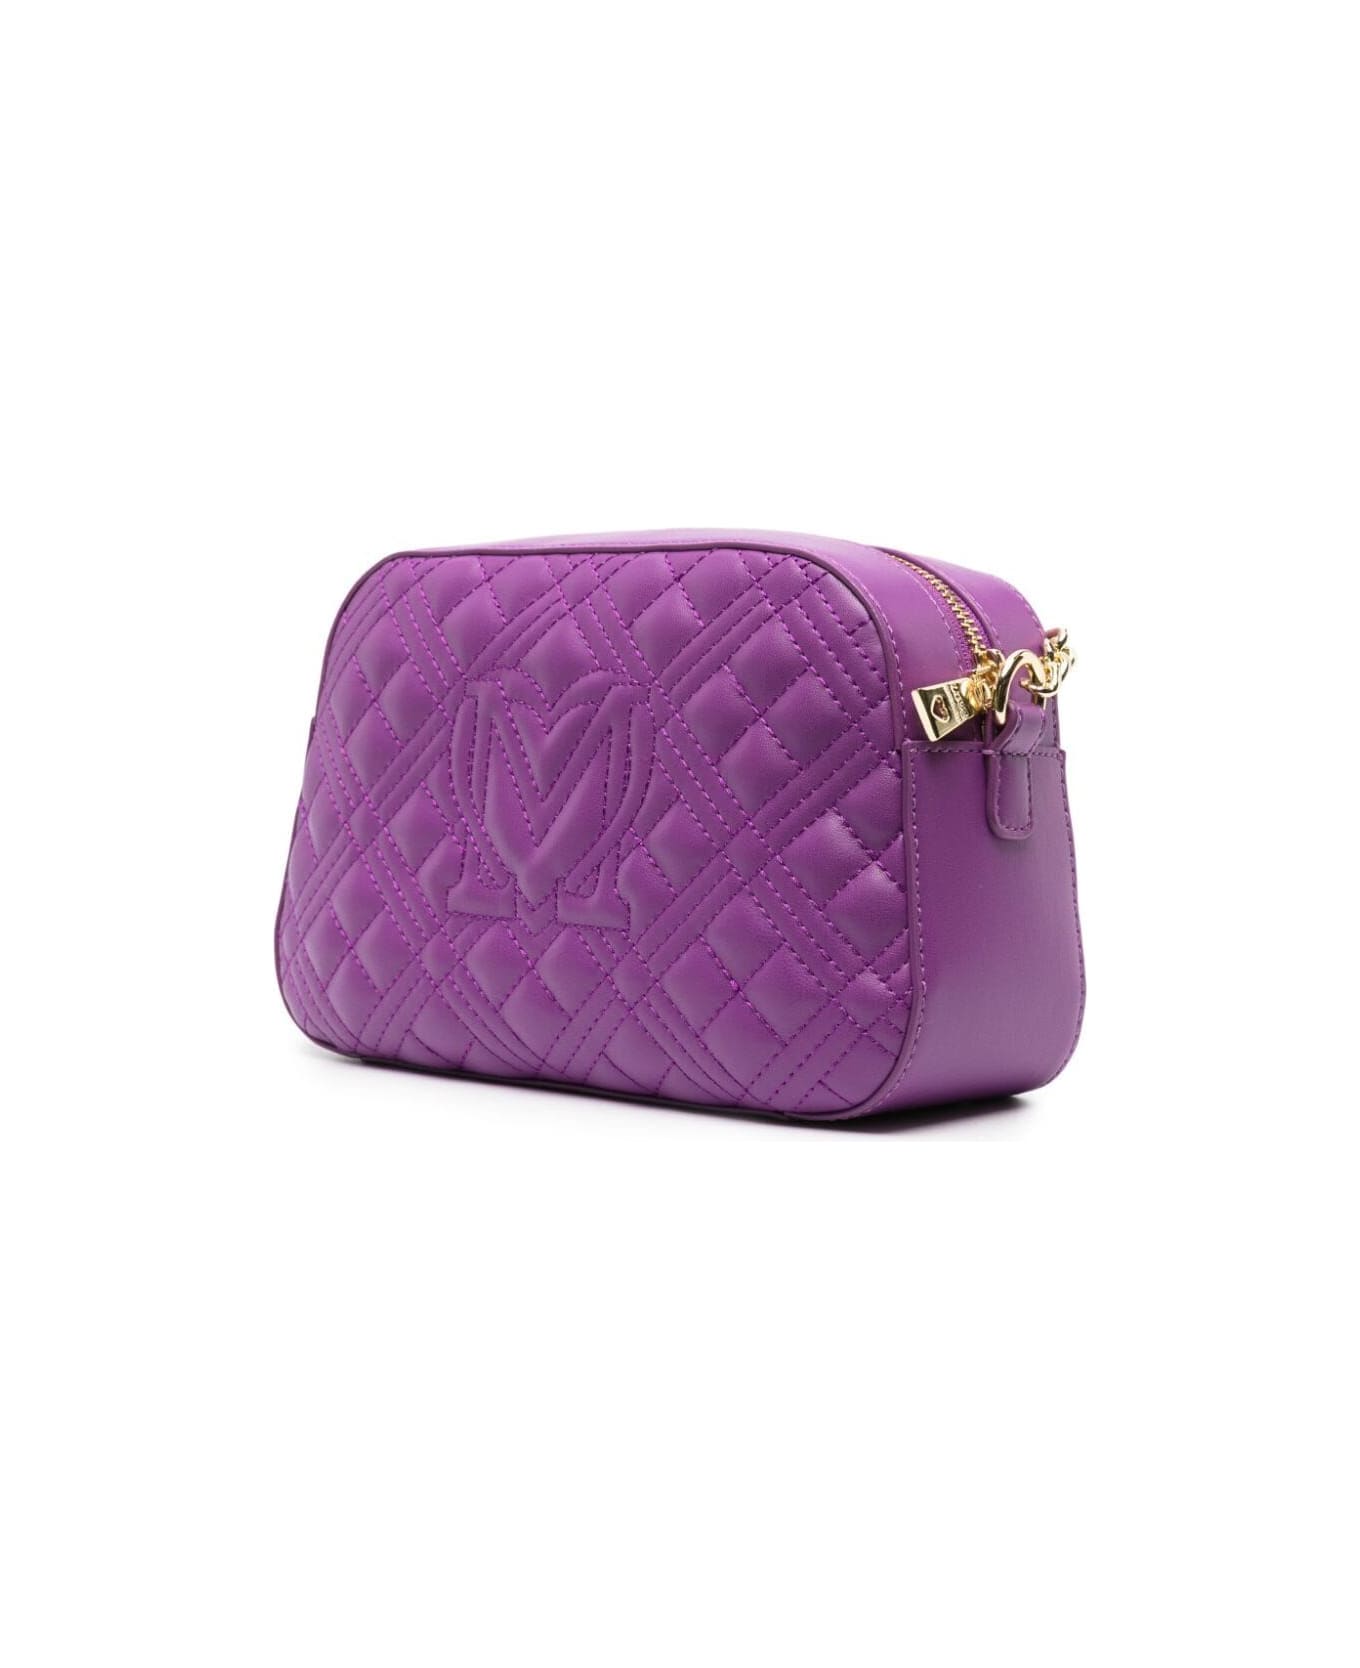 Love Moschino Quilted Shoulder Bag - Purple